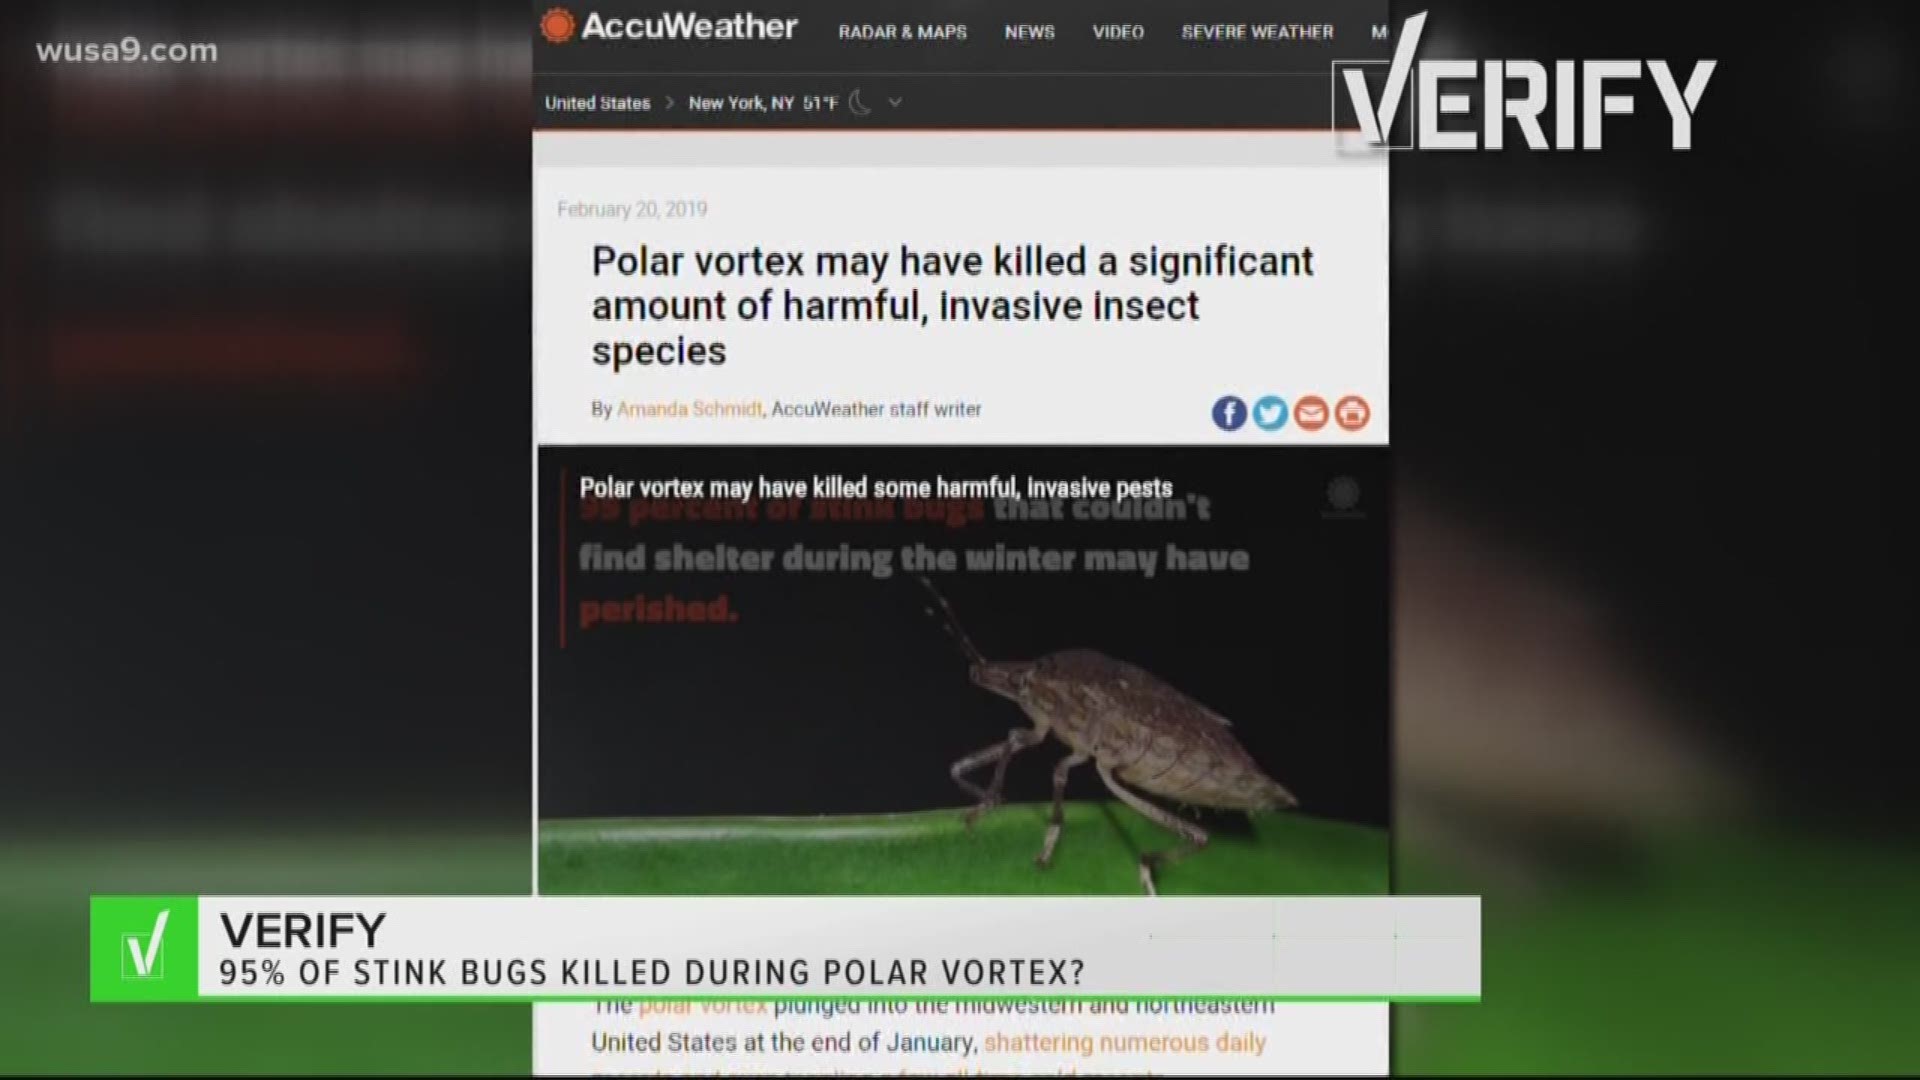 The Verify team got the facts on a report that recently claimed the polar vortex may have killed off 95 percent of the stink bug population.